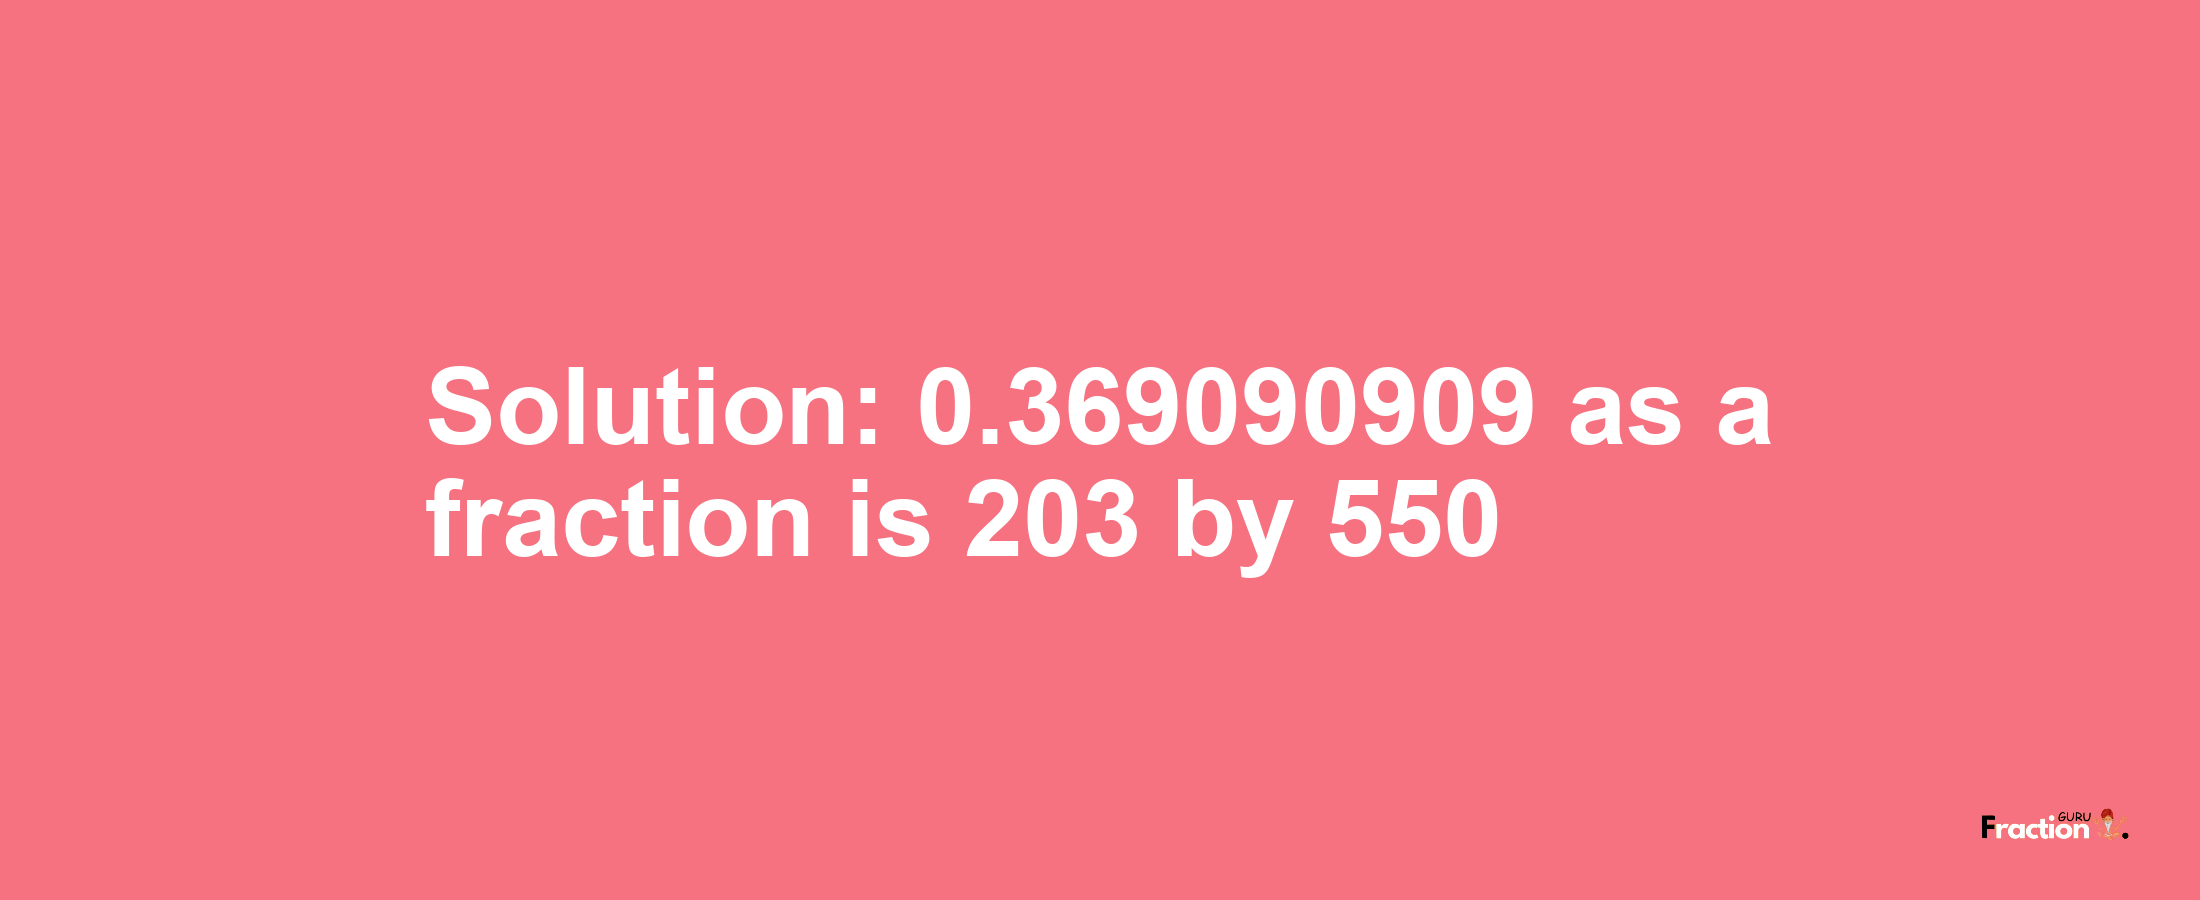 Solution:0.369090909 as a fraction is 203/550